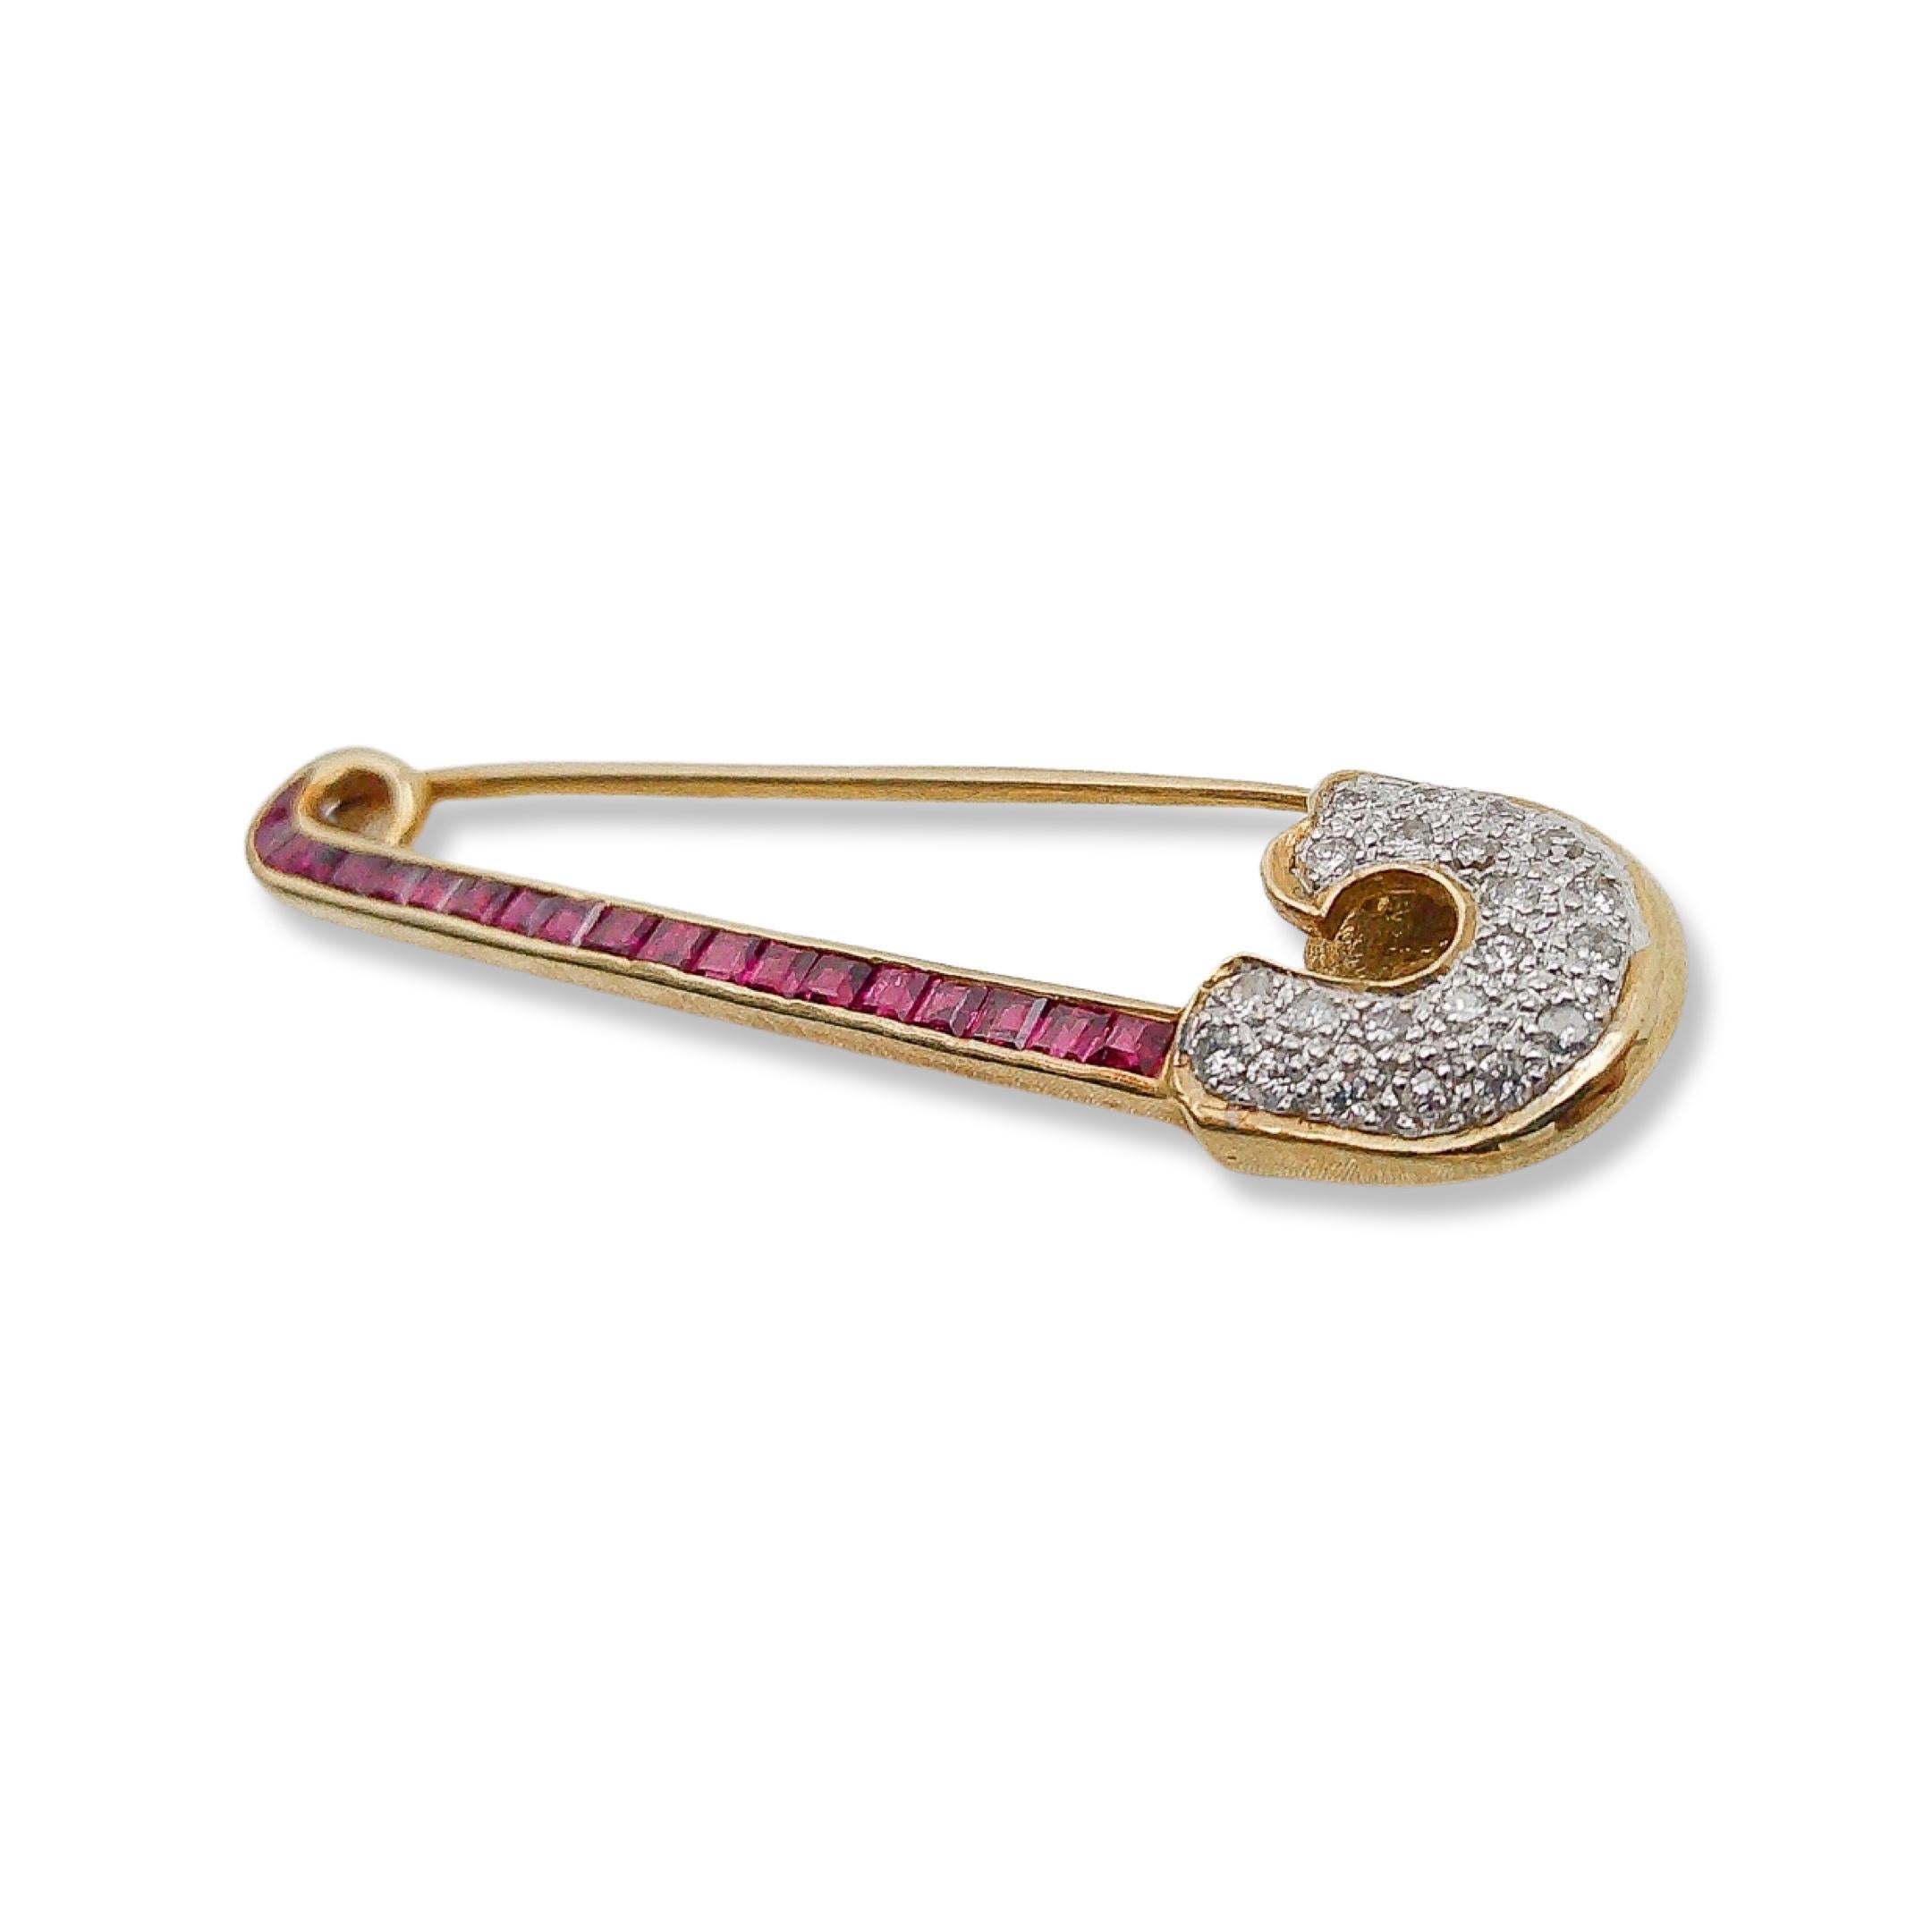 This opulent Art Deco 18k Ruby and Diamond Safety Pin was handcrafted sometime during the Art Deco design period (1920-1940). Inspired by the geometric designs and luxurious motifs of the Art Deco era, our safety pin encapsulates the charm of a